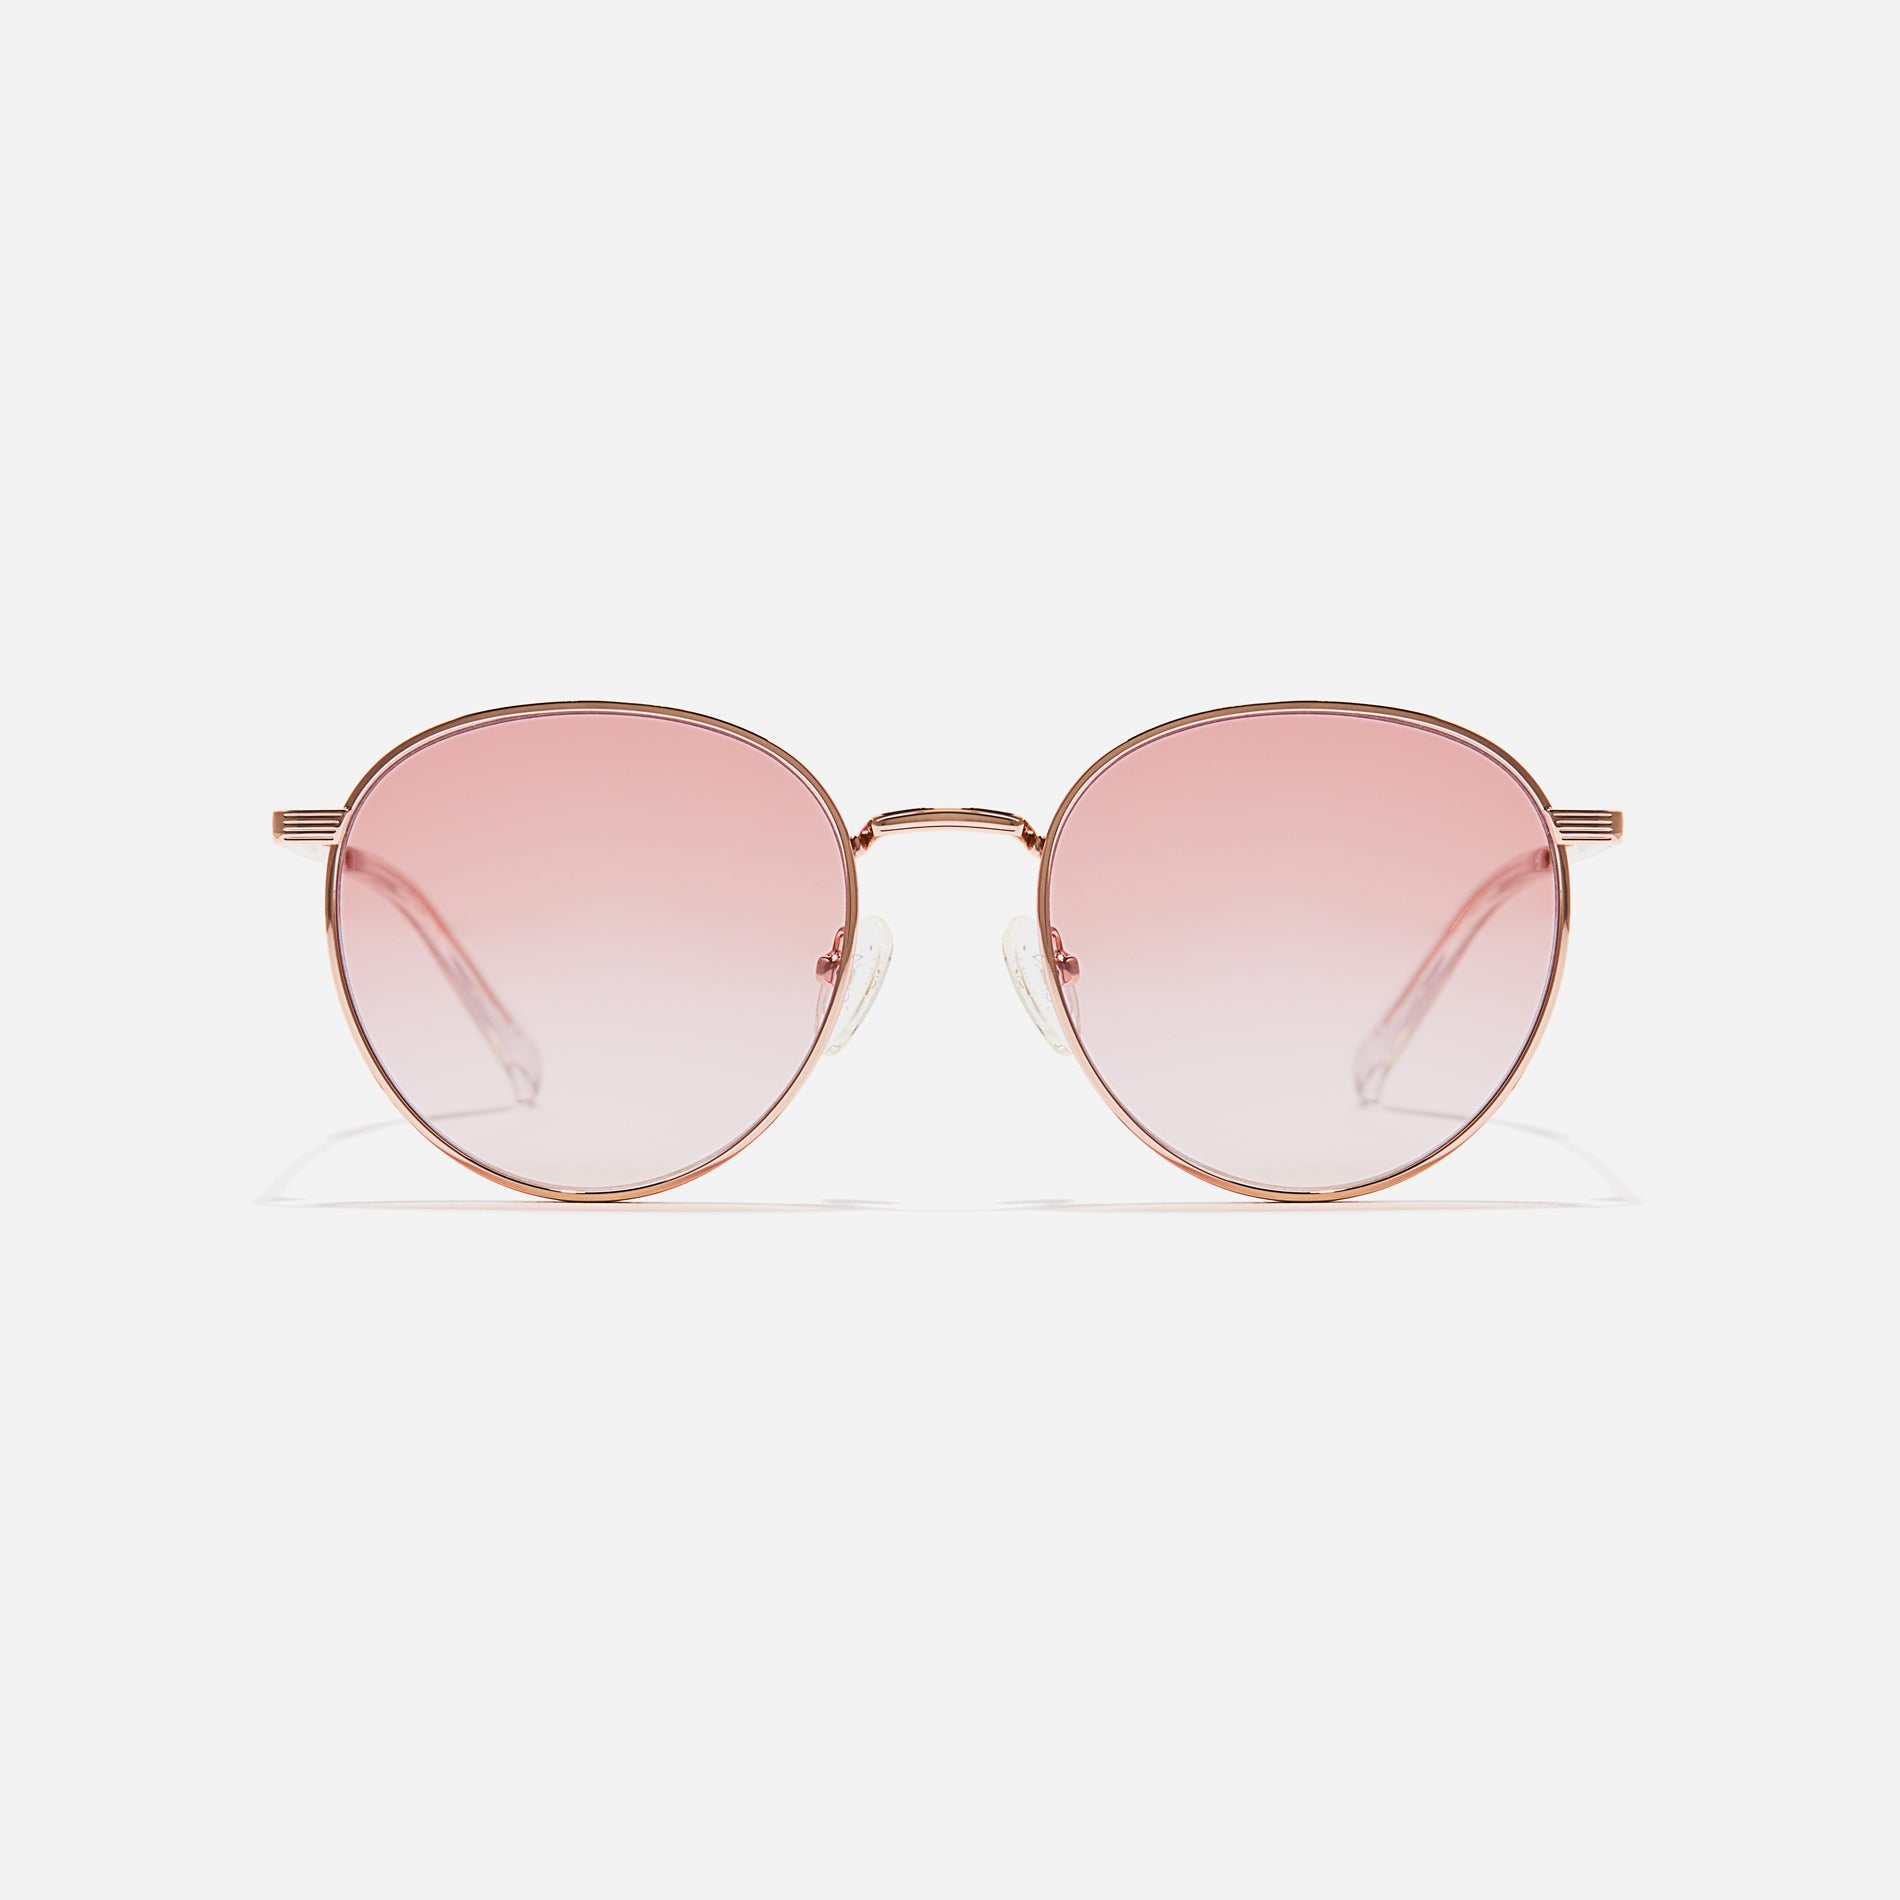  Boeing-style sunglasses featuring chic temple details and half-mirrored lens coating that reduces glare and provides 100% UV protection.